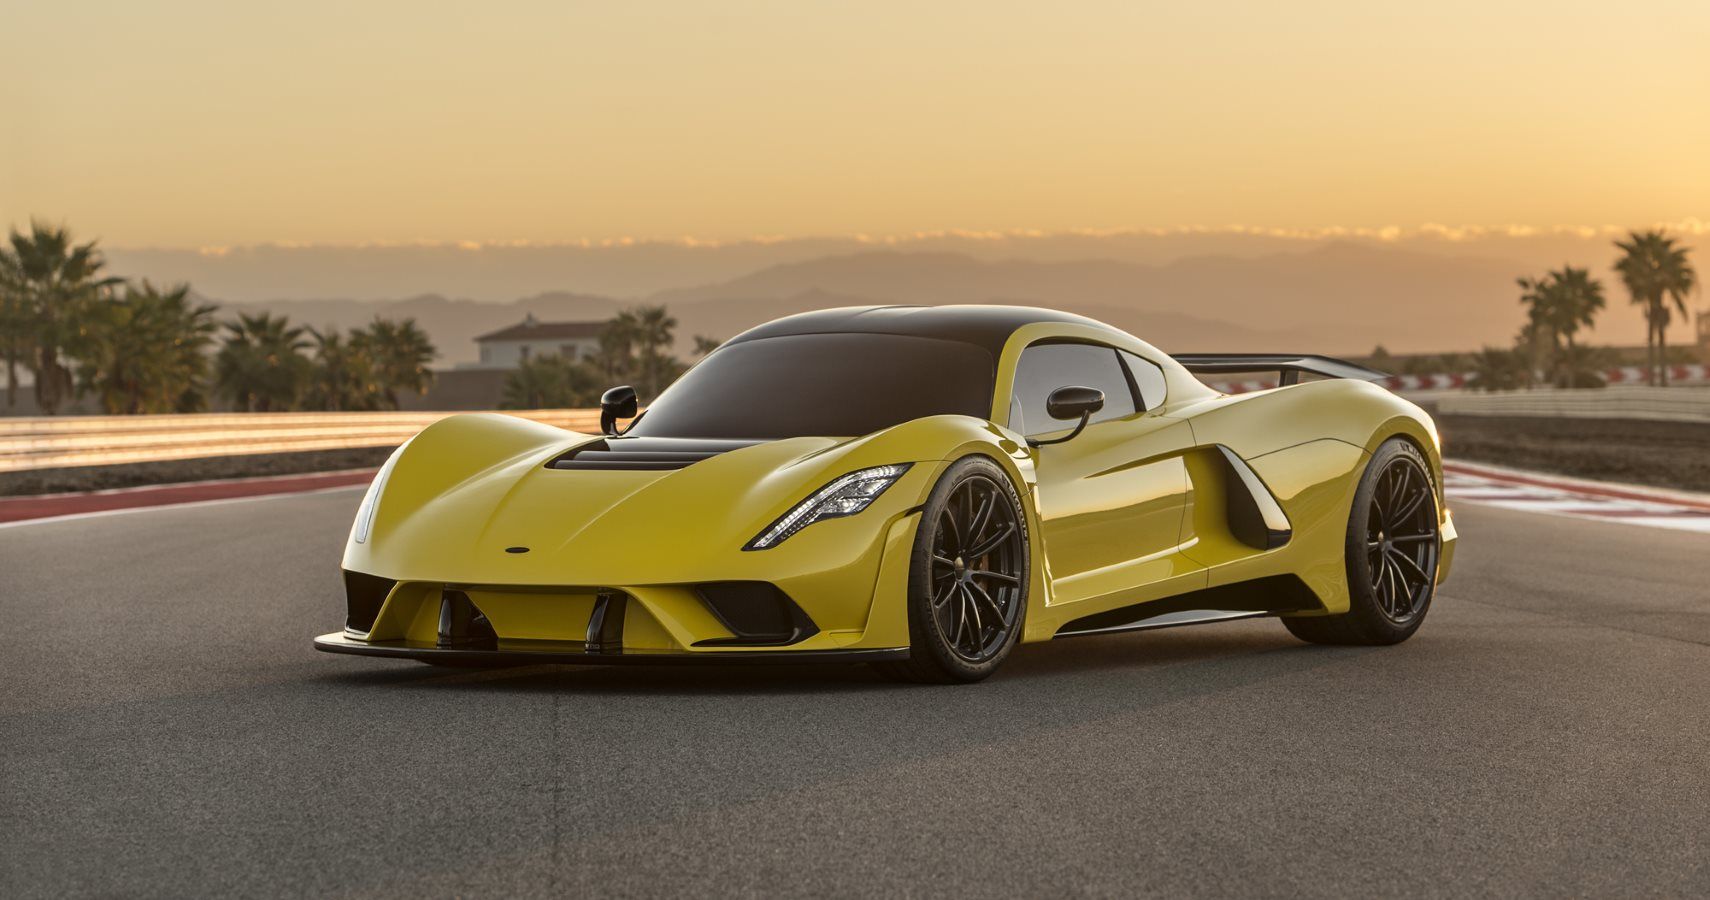 Hennessey F5 Venom Is Aiming For Top Speed Of 311 MPH